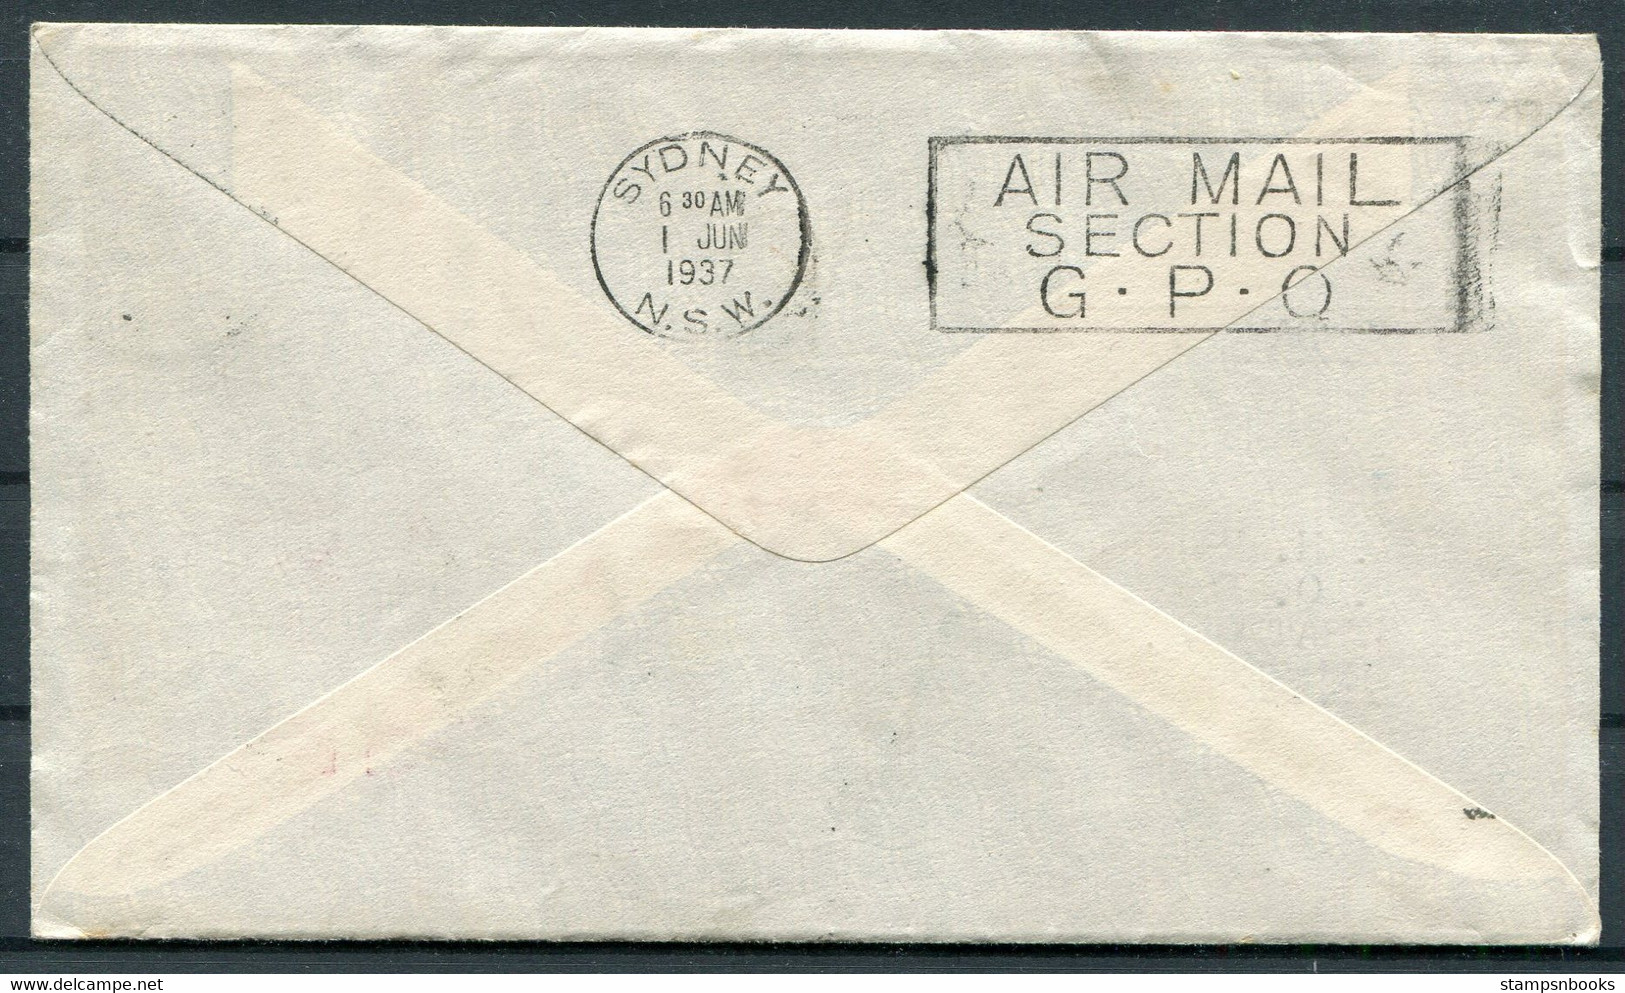 1937 South Africa Coronation First Day Cover, Imperial Airways Flight Benoni - New Zealand Via Sydney Australia Air Mail - Luftpost